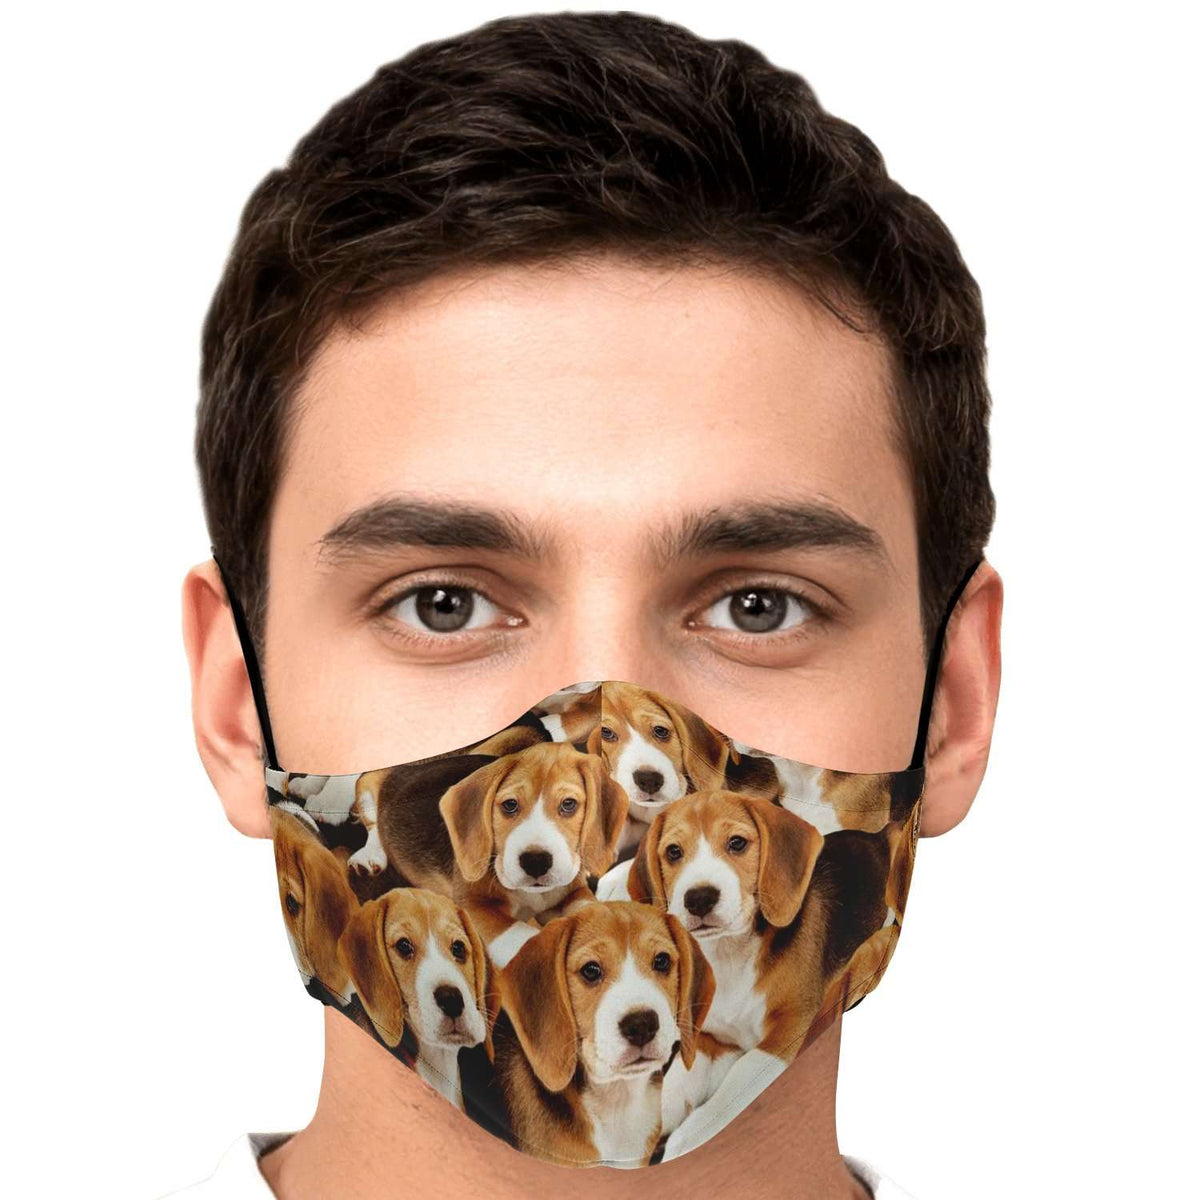 Designs by MyUtopia Shout Out:Beagle Puppies Fitted Fabric Face Mask with adjustable ear loops,Adult / Single / No filters,Fabric Face Mask